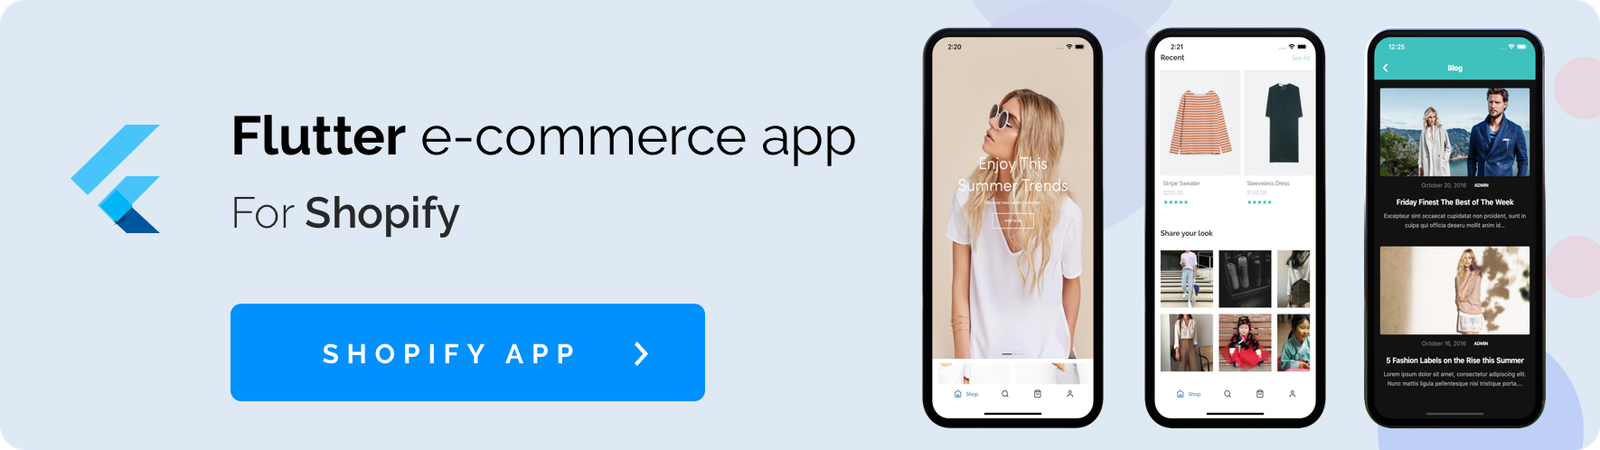 EvaStore - the complete mobile app for Shopify store by React Native and GraphQL - 5